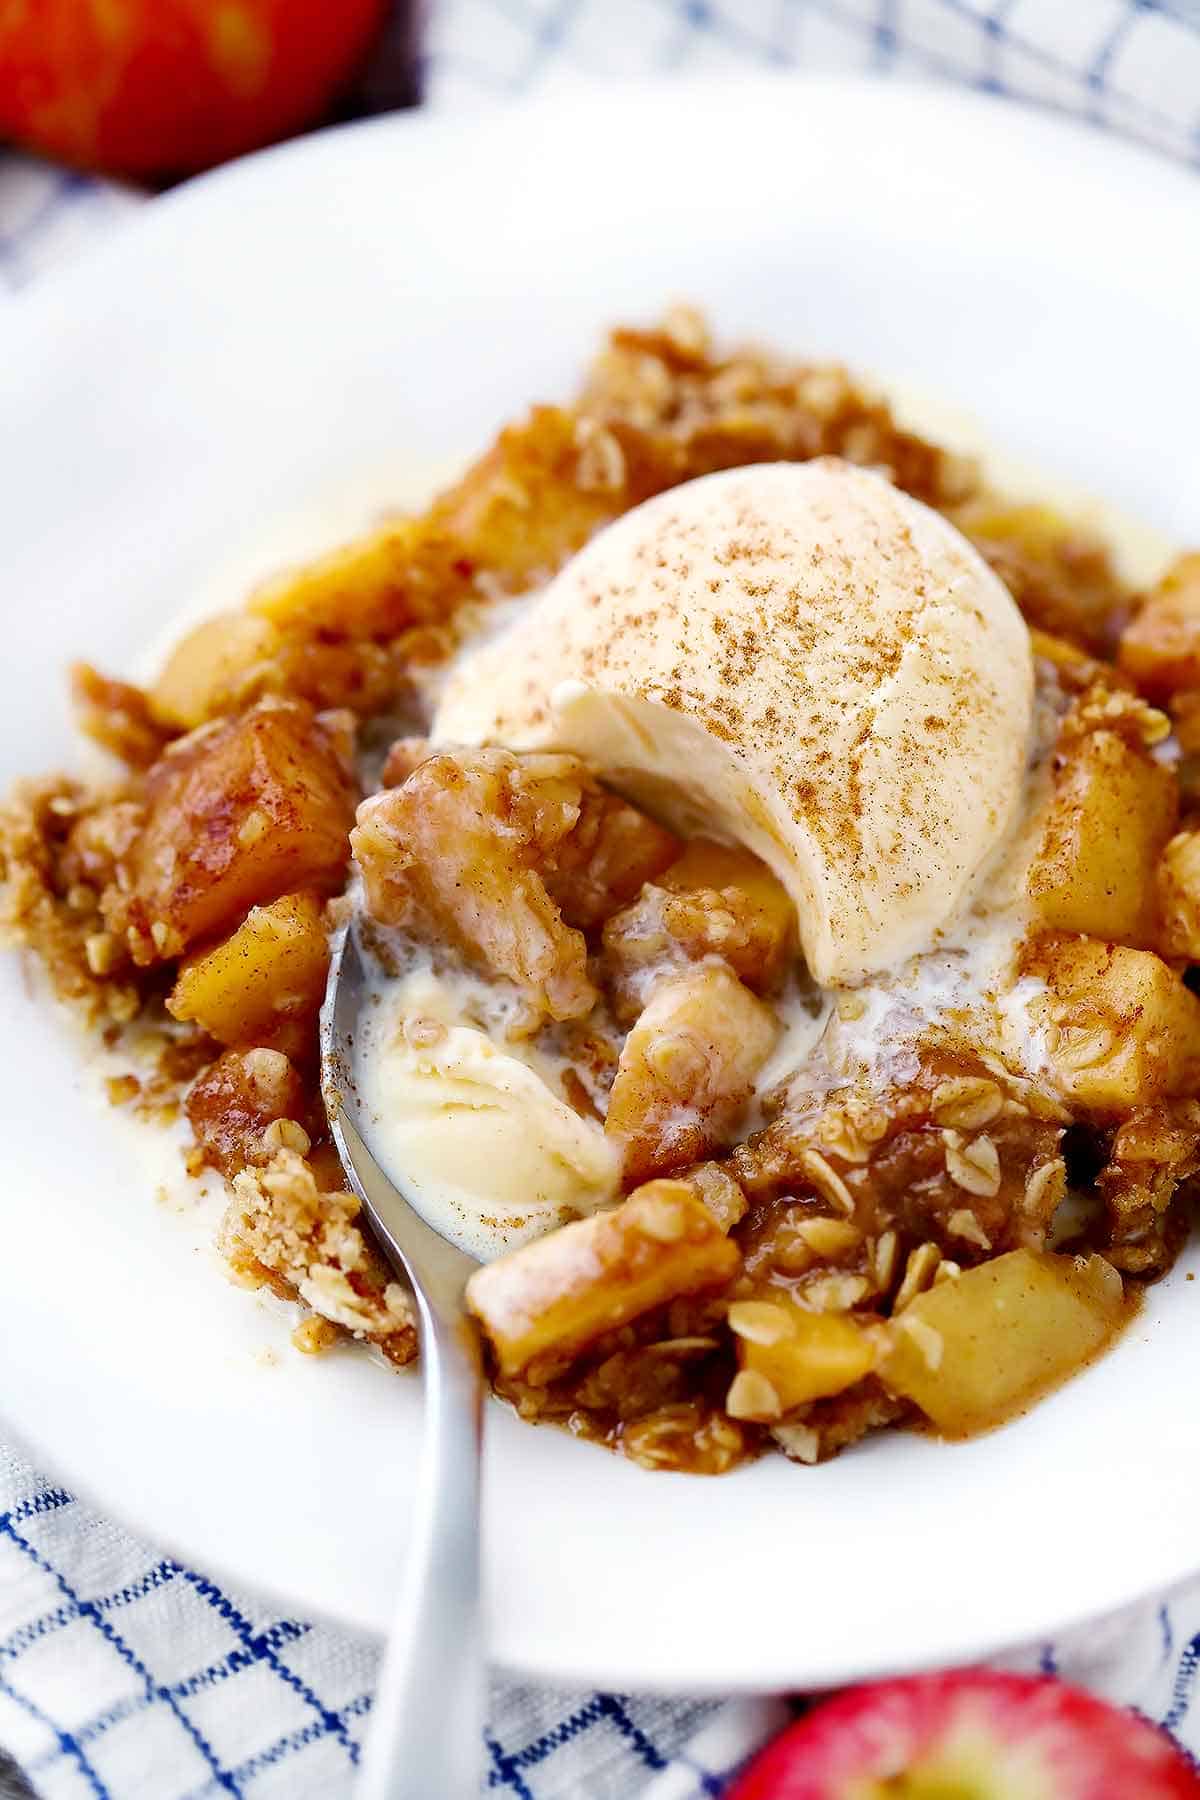 Apple crisp with vanilla ice cream melting on top and a spoon taking a bite out of it.